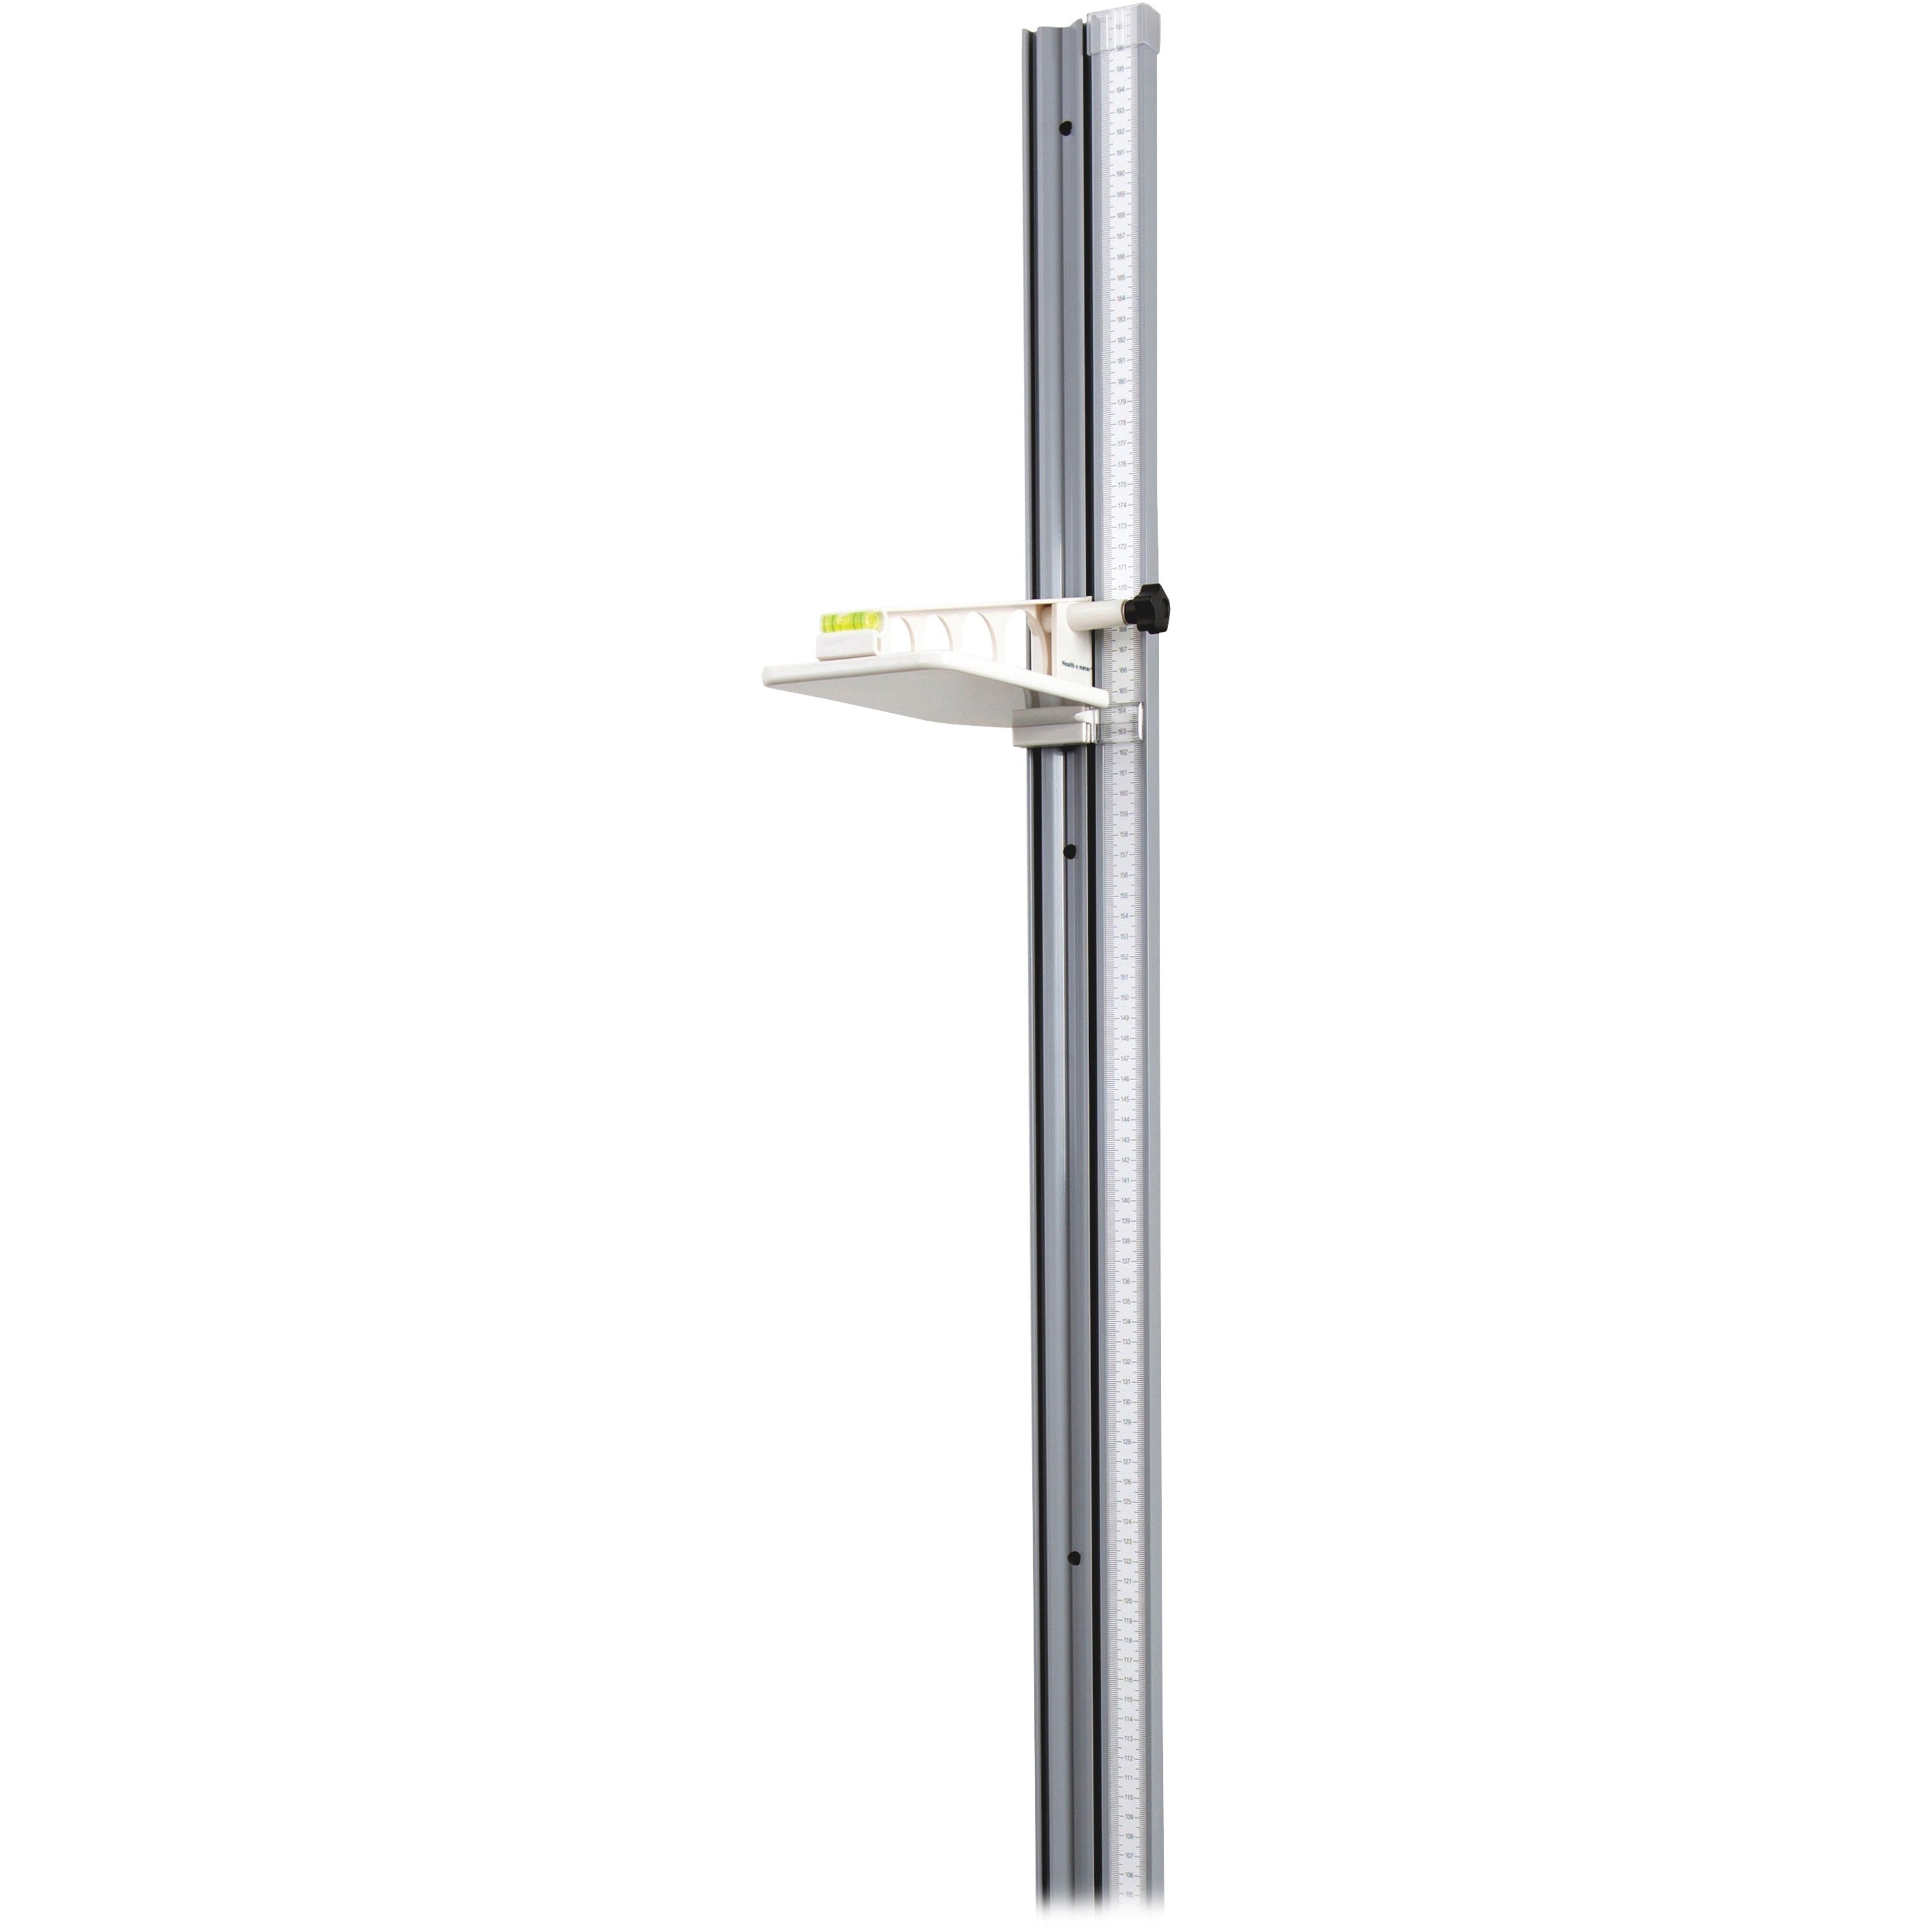 health-o-meter-wall-mounted-height-rod-555-length-5-width-1-16-graduations-imperial-metric-measuring-system-1-each_hhm205hr - 1